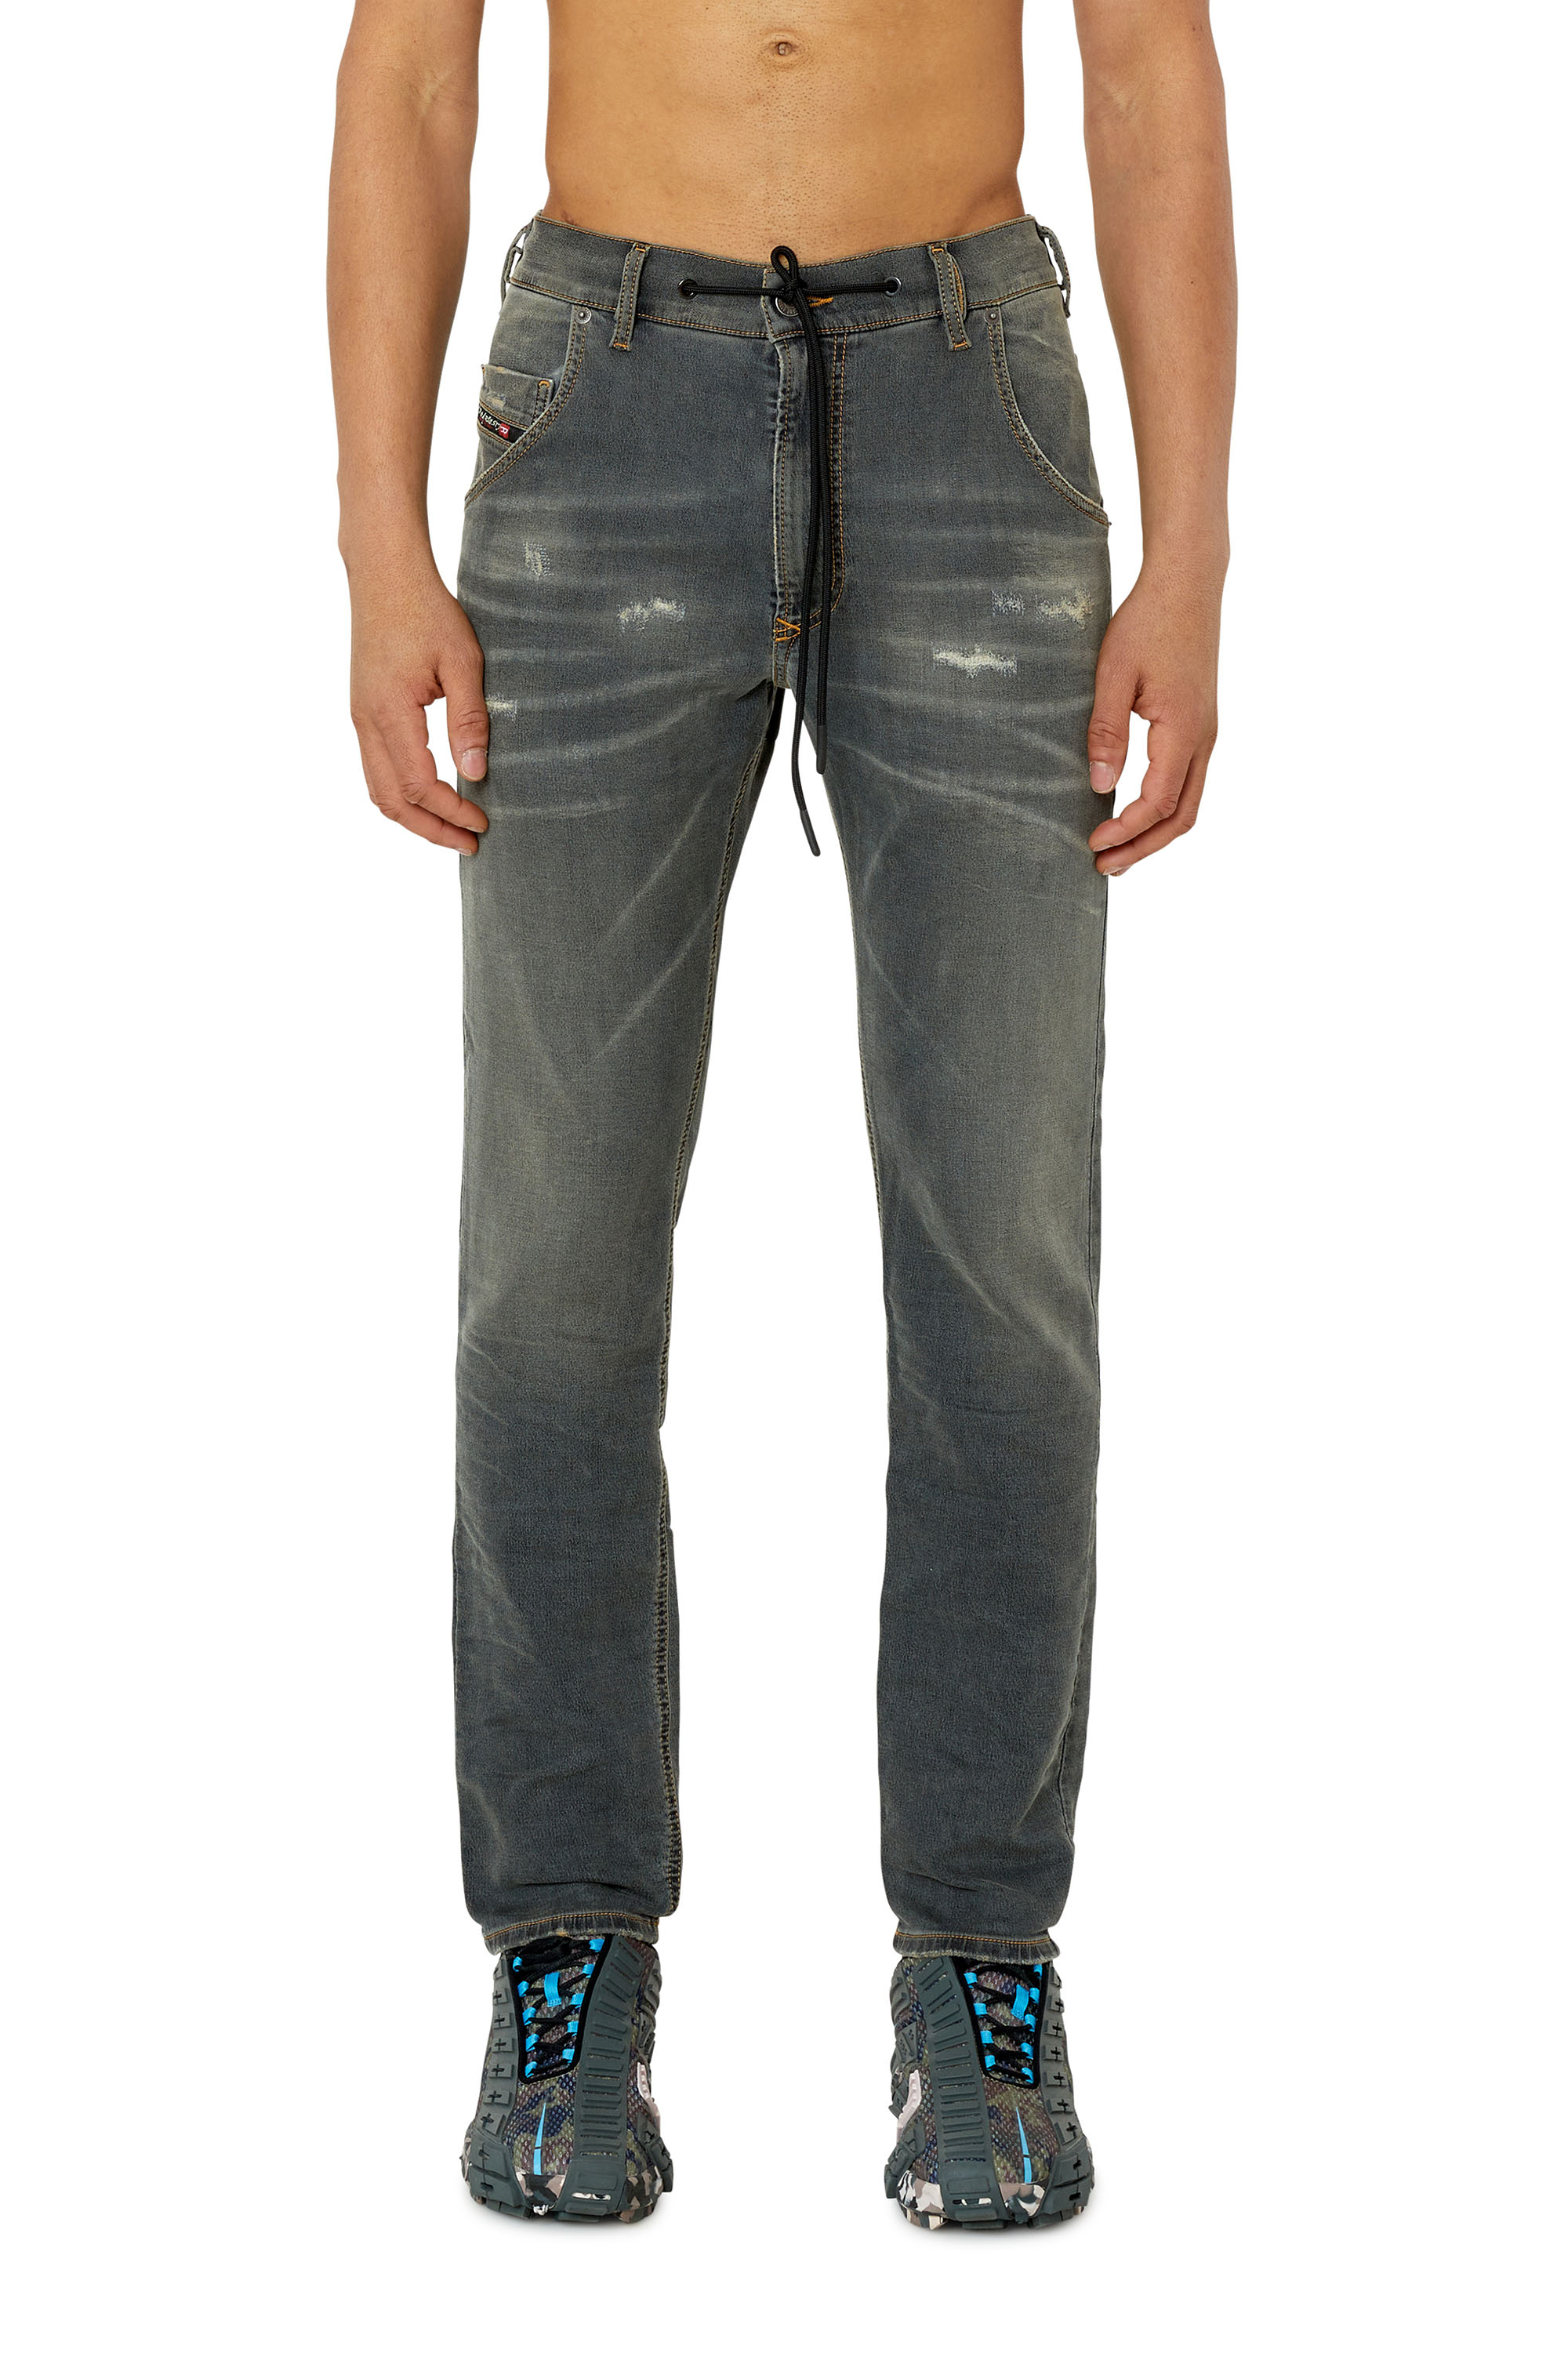 Diesel Tapered Krooley Jogg Jeans